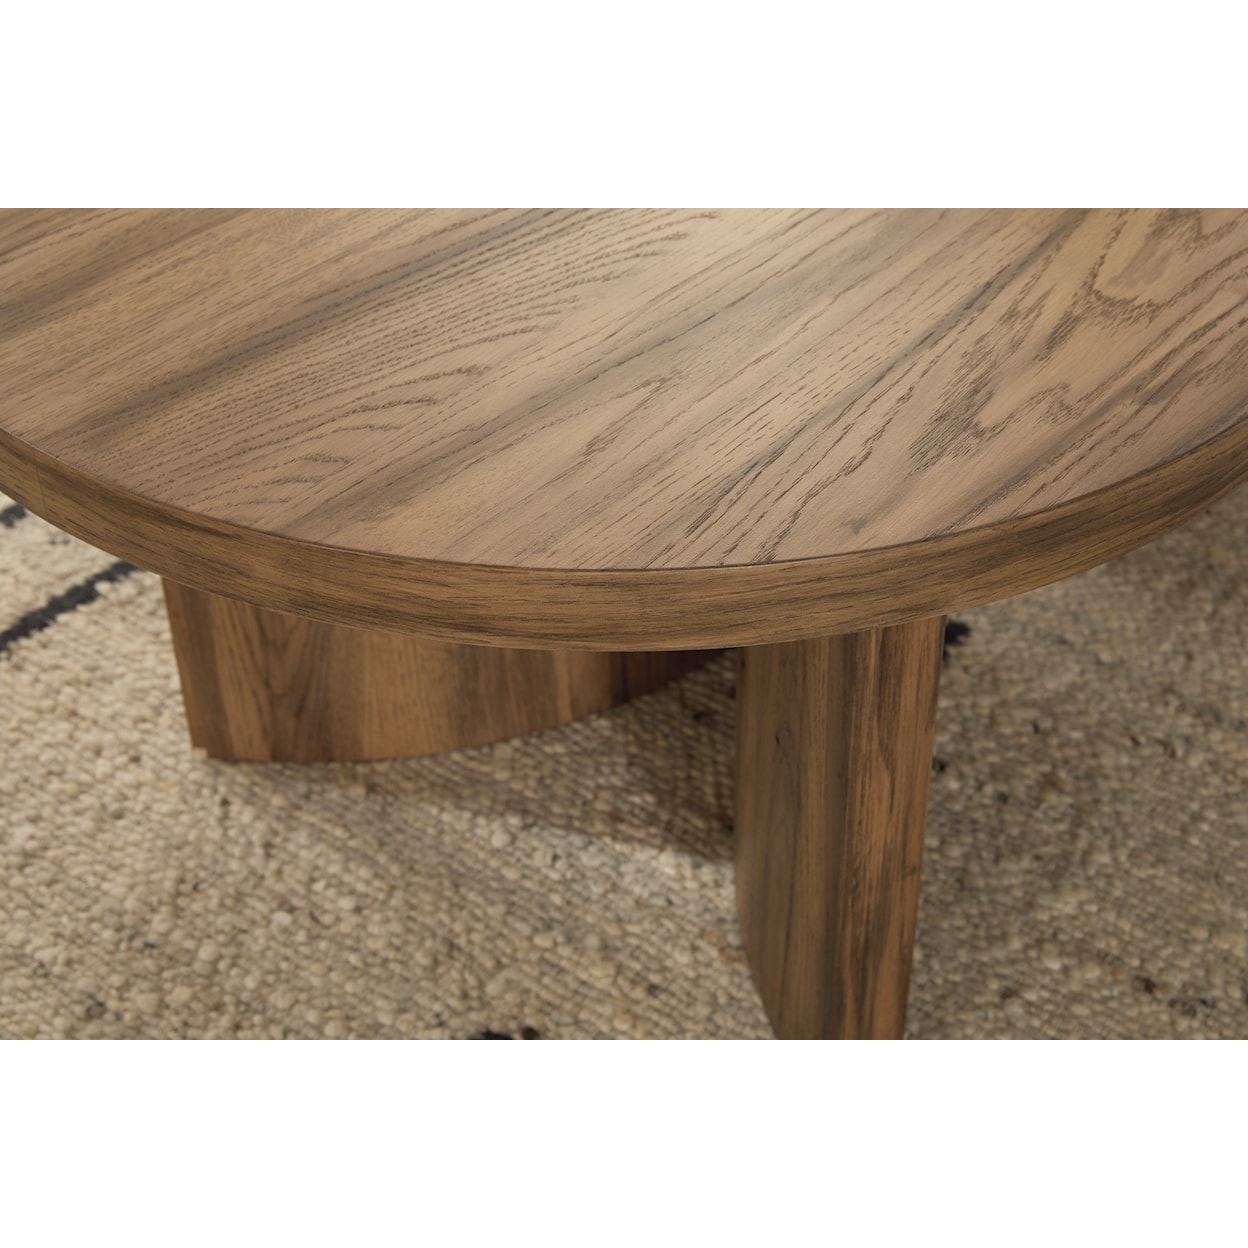 Signature Design by Ashley Furniture Austanny Oval Coffee Table